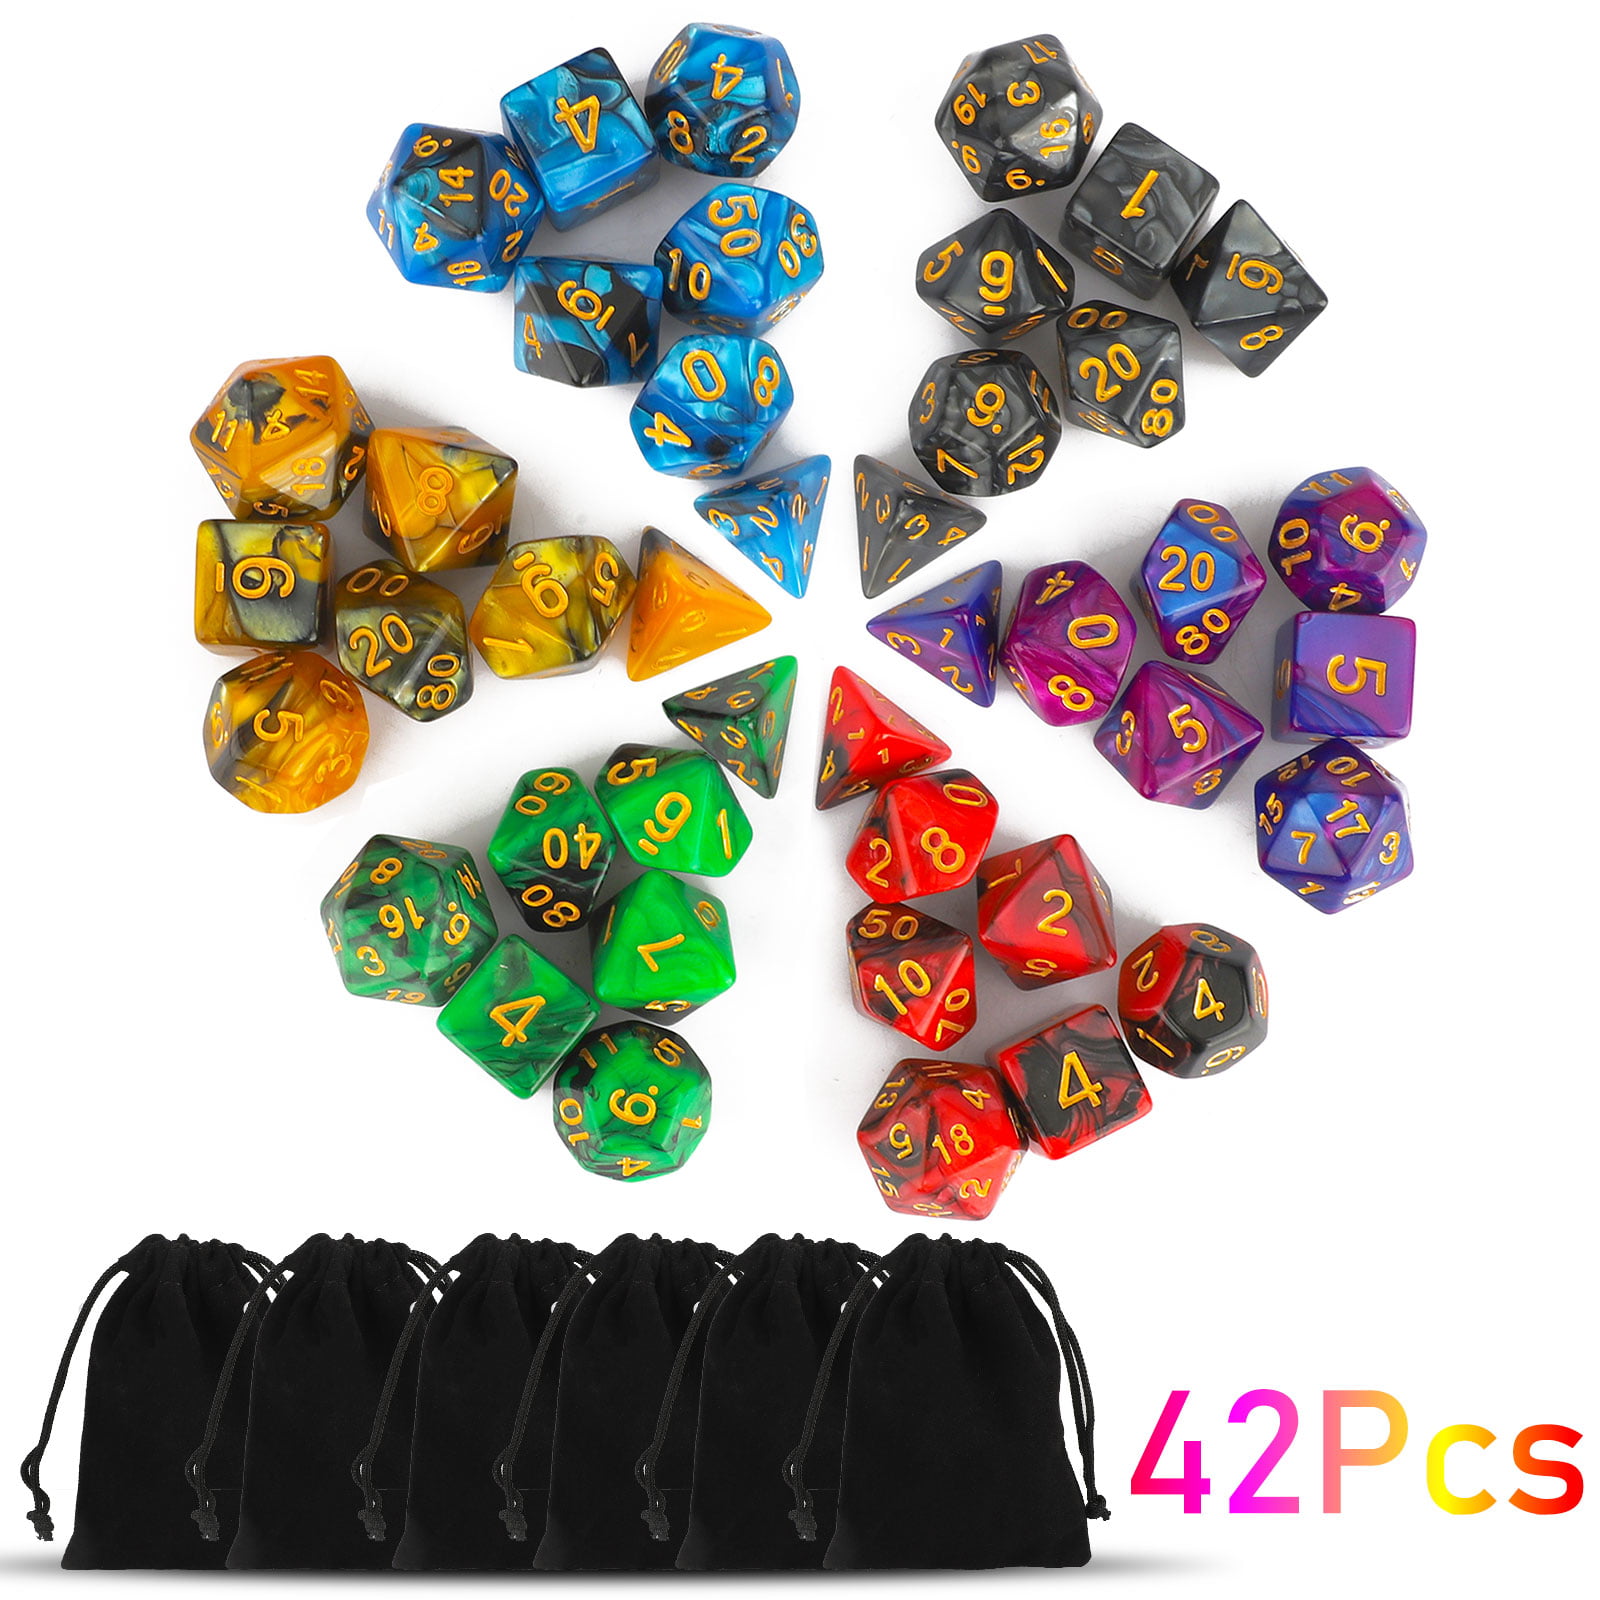 Bag 6 Colors NEW 42Pcs/set Shiny Polyhedral Dice DND RPG MTG Role Playing Game 